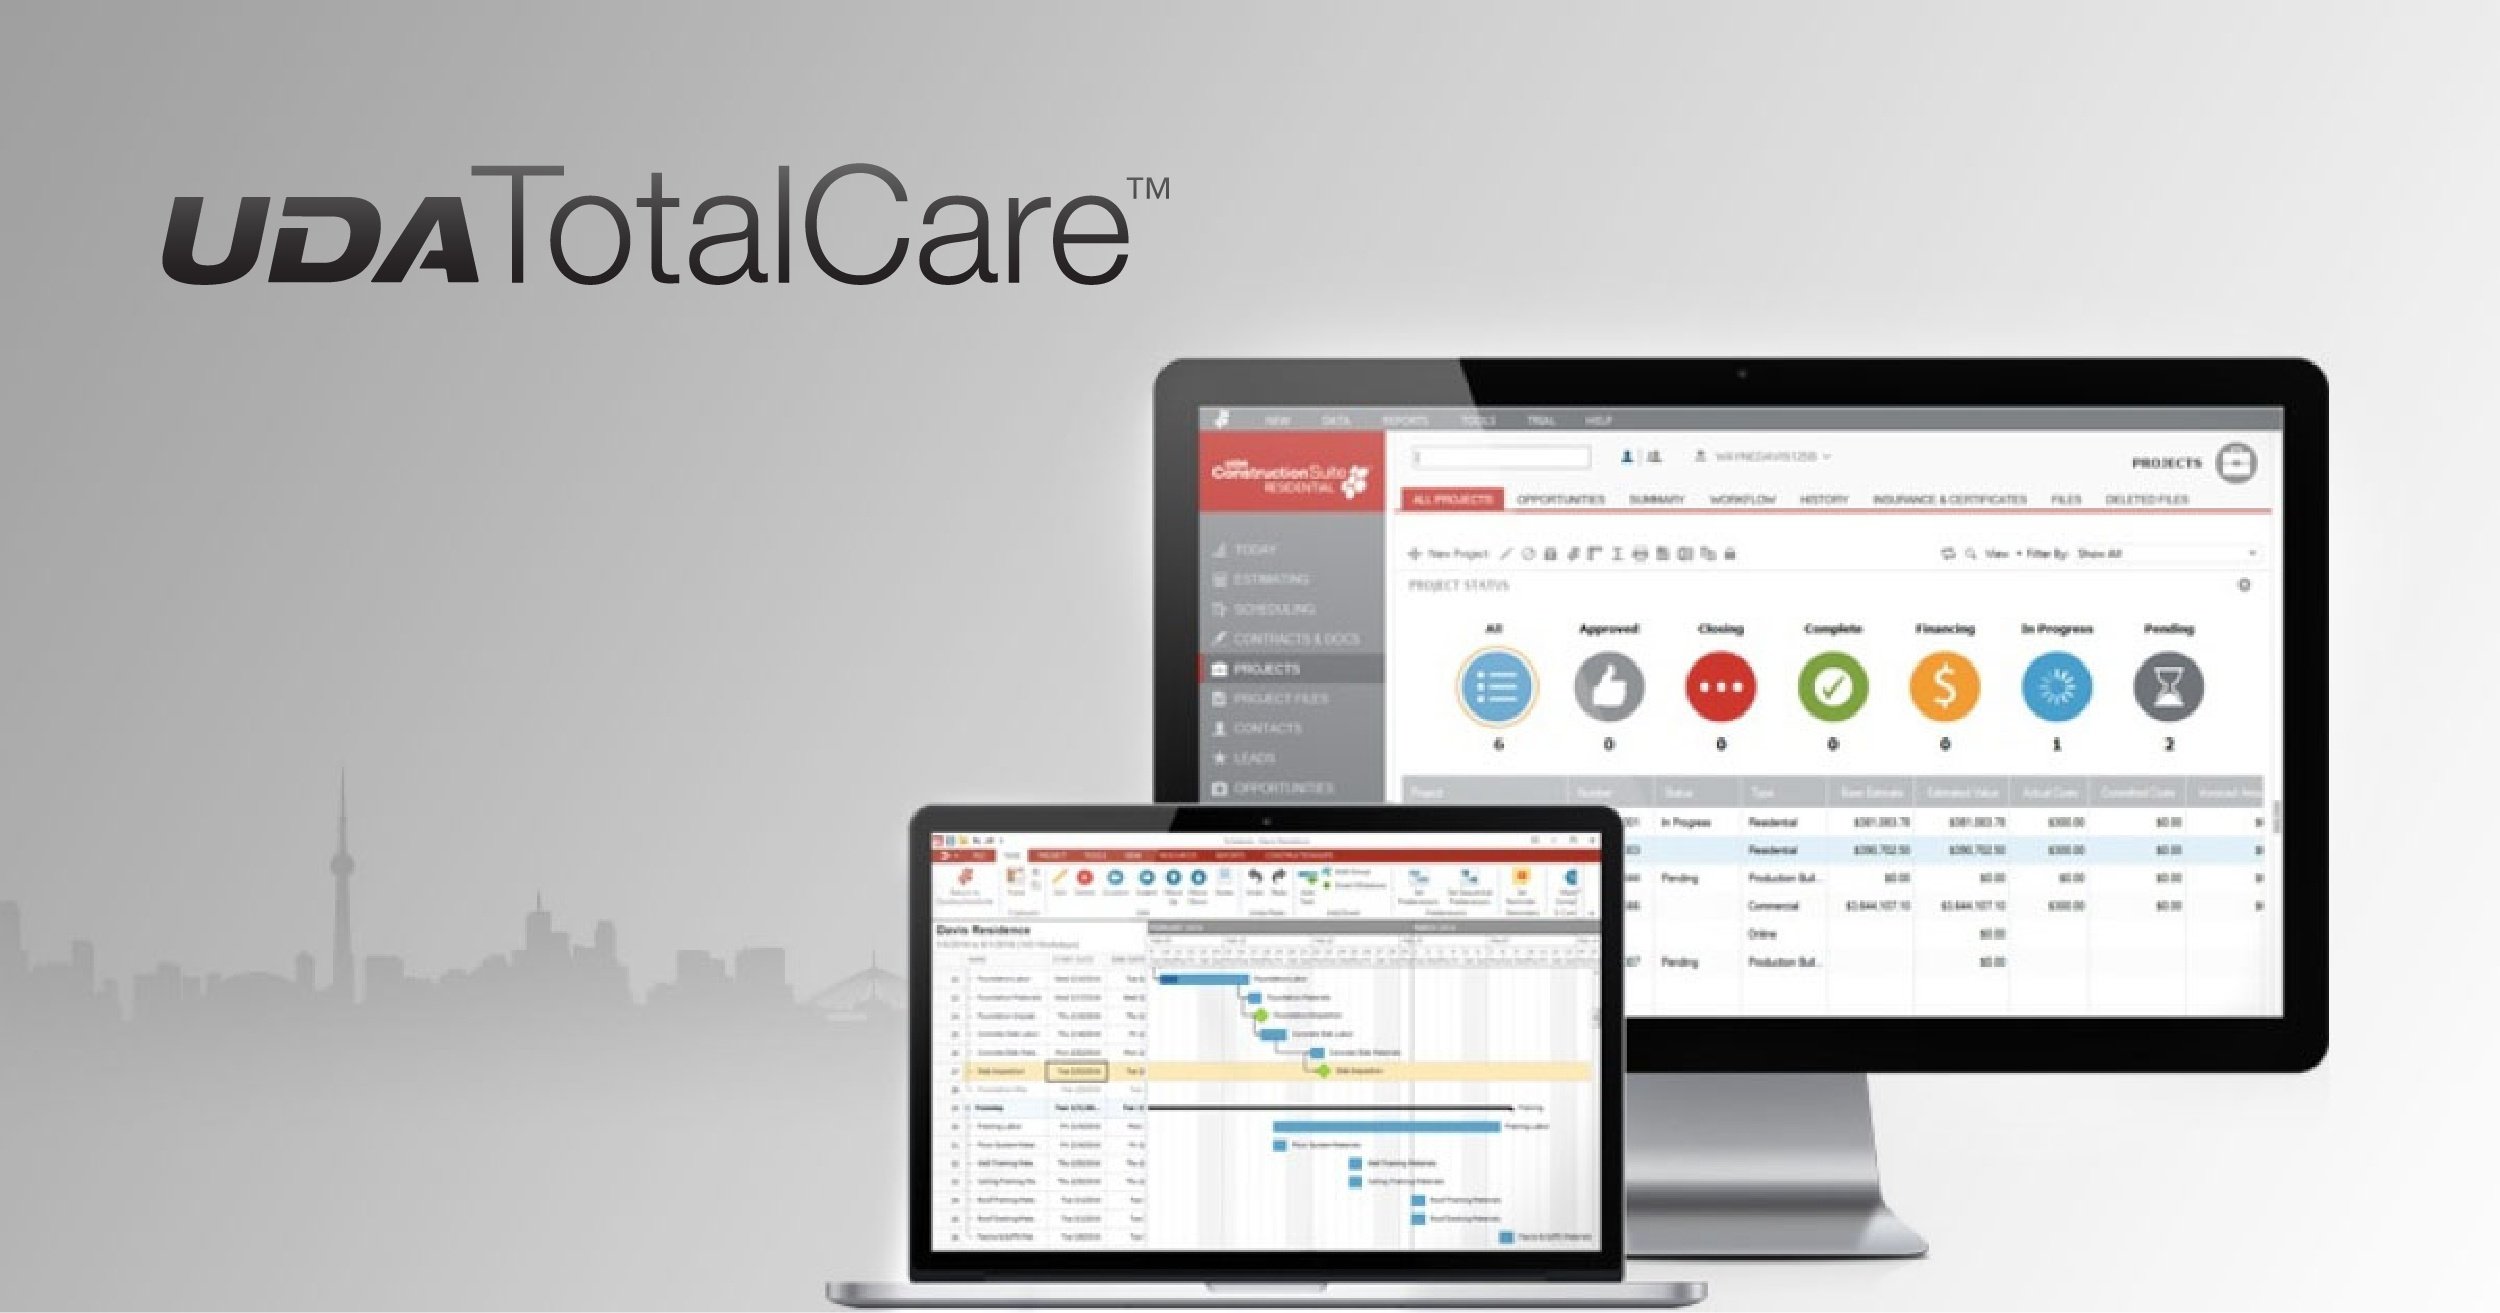 ConstructionSuite 9 Upgrades Now Available for TotalCare Members